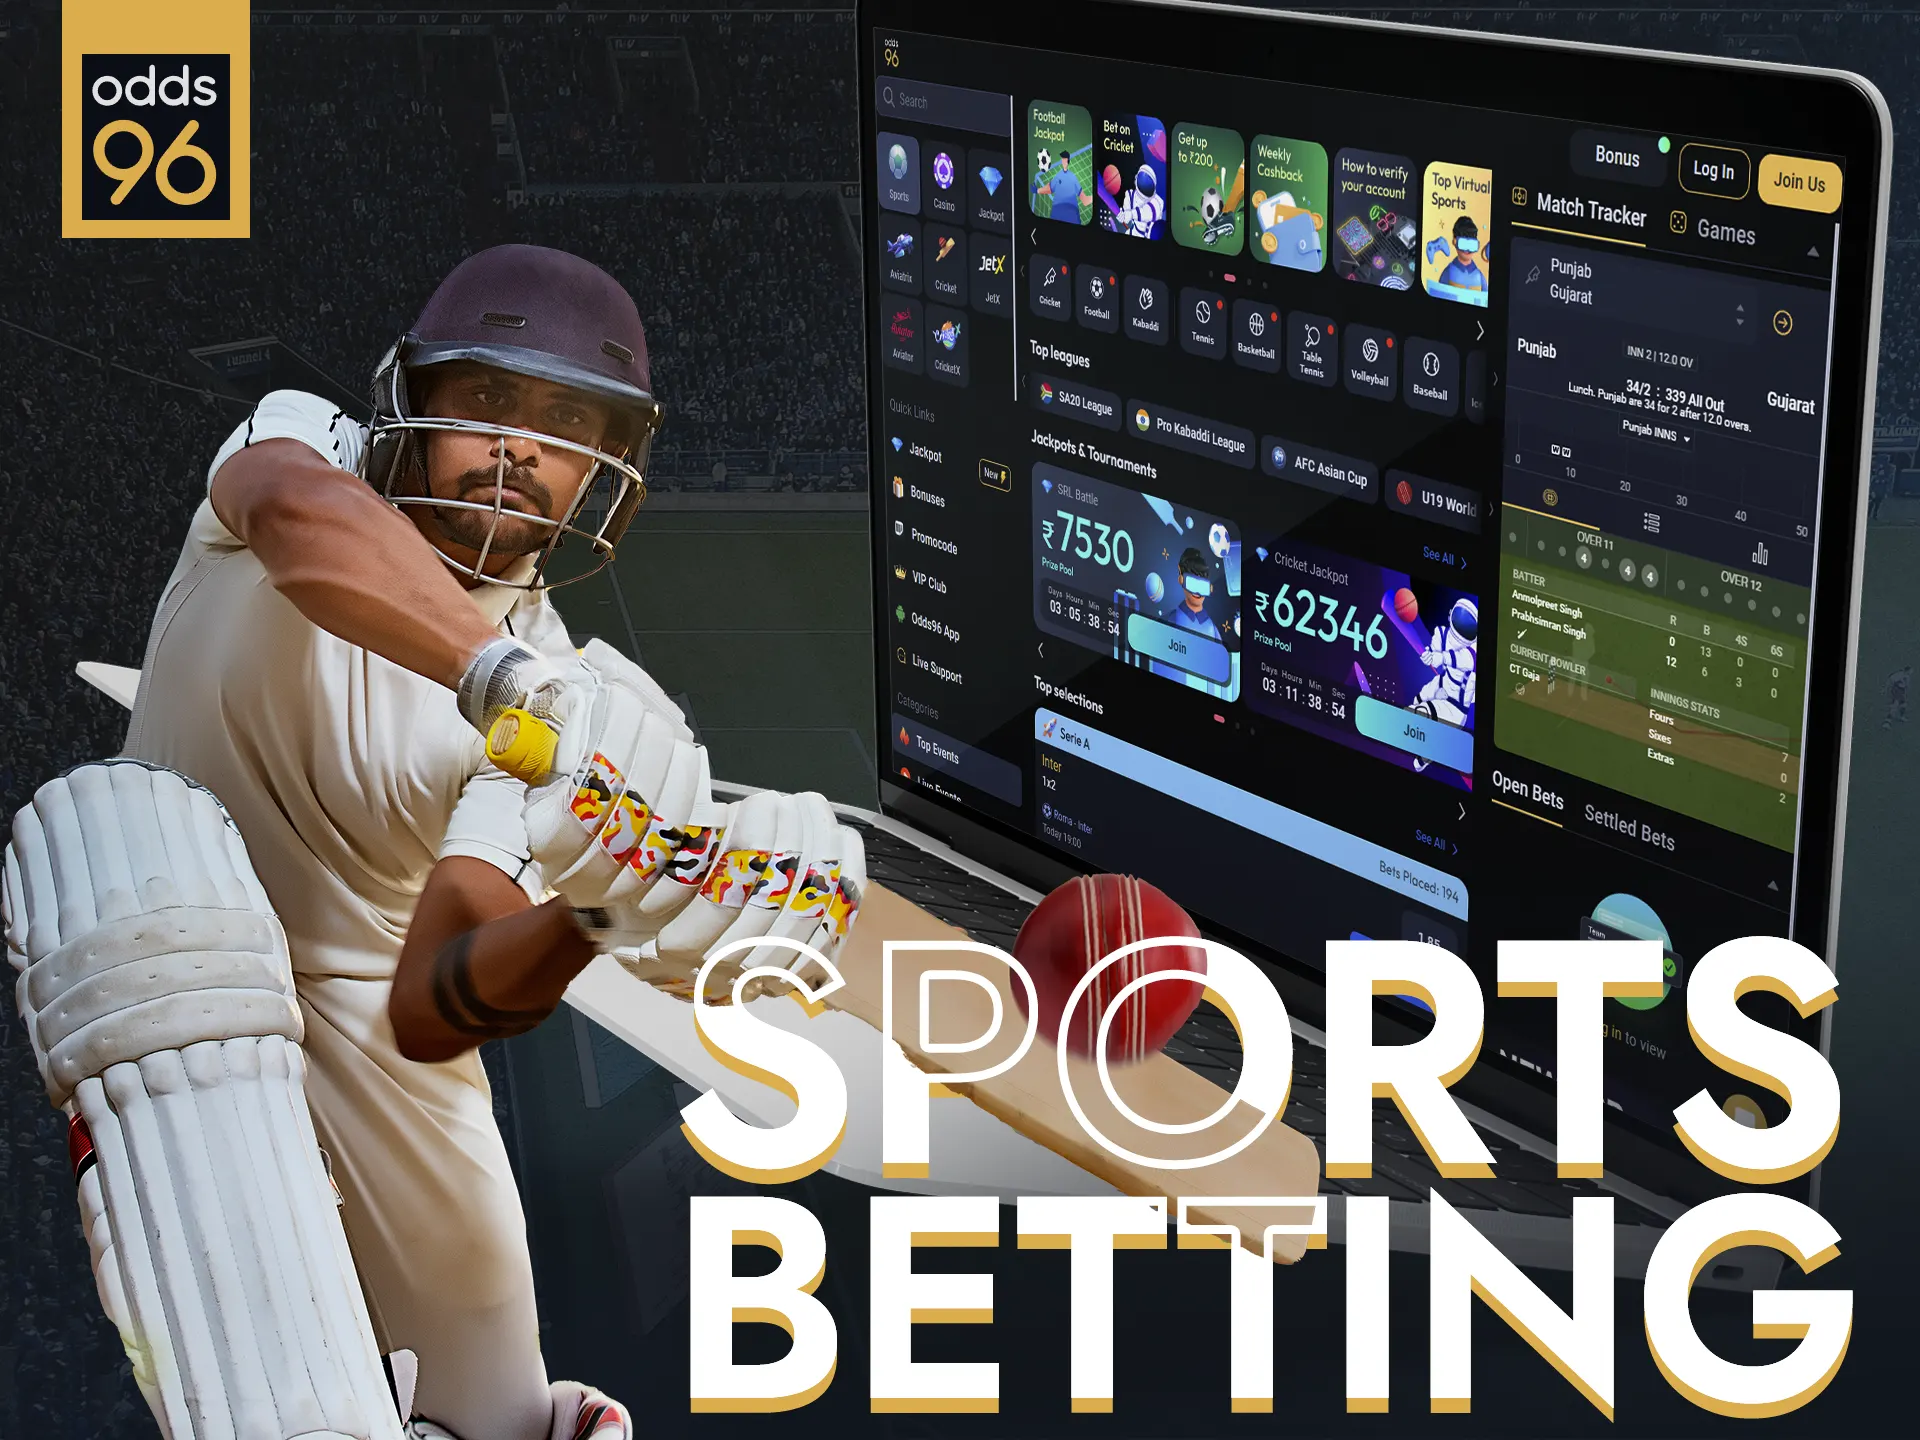 Explore Odds96, which offering diverse options for sports betting.